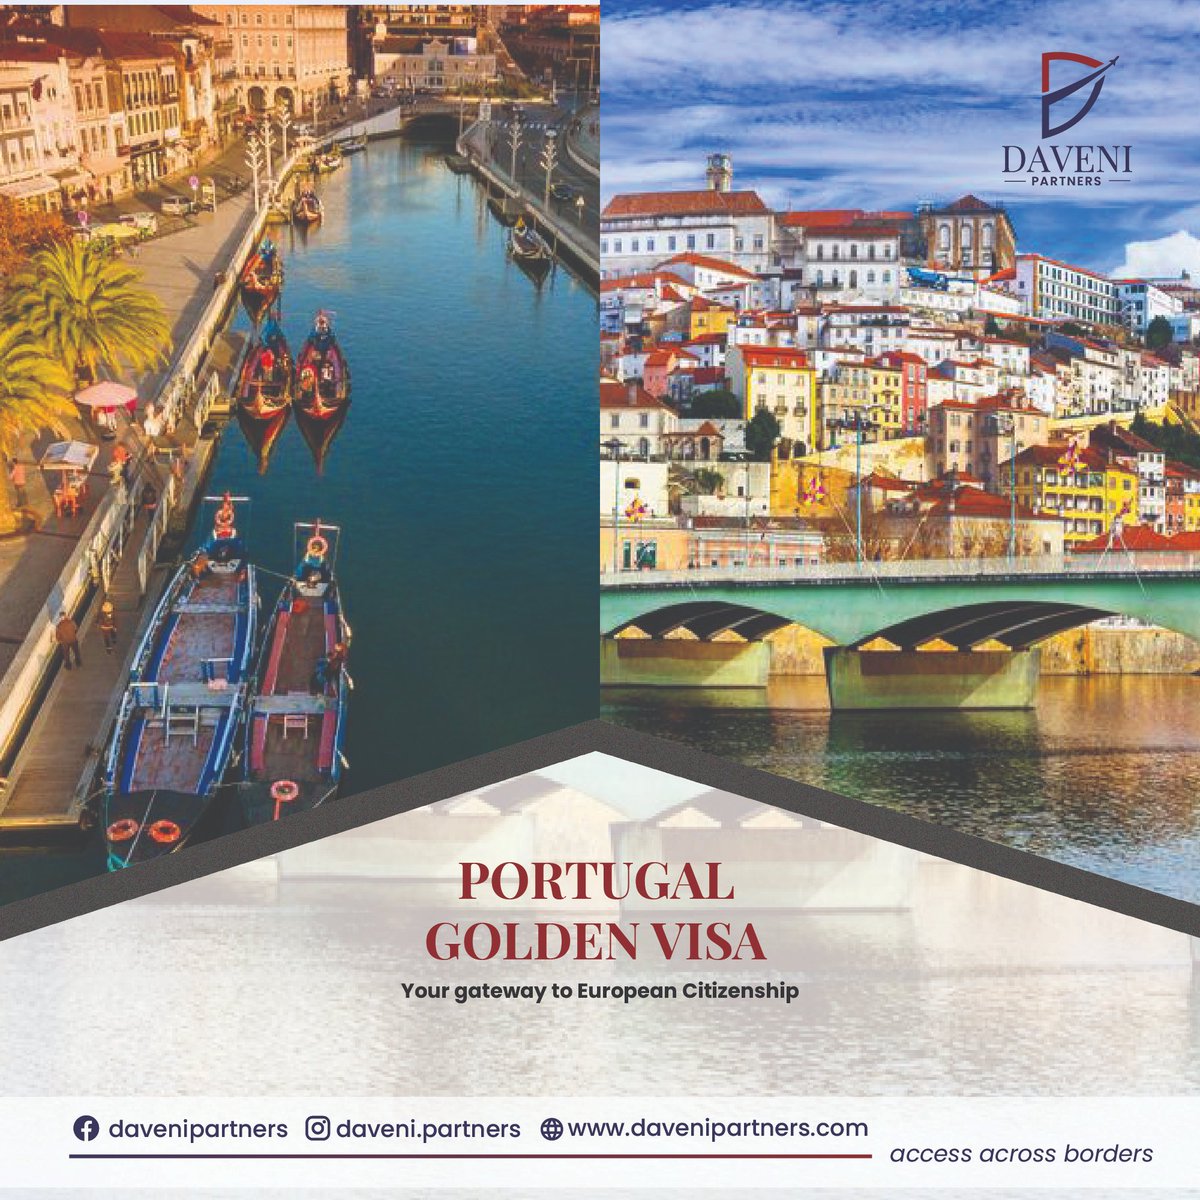 Portugal Golden Visa, your gateway to European Citizenship.
Contact us at Daveni Partners to learn more about the key benefits of Portugal's Residency by Investment program.

#davenipartners #portugal #portugalresidency #portugal🇵🇹 #portugalinvestment #africa #residencyprogram